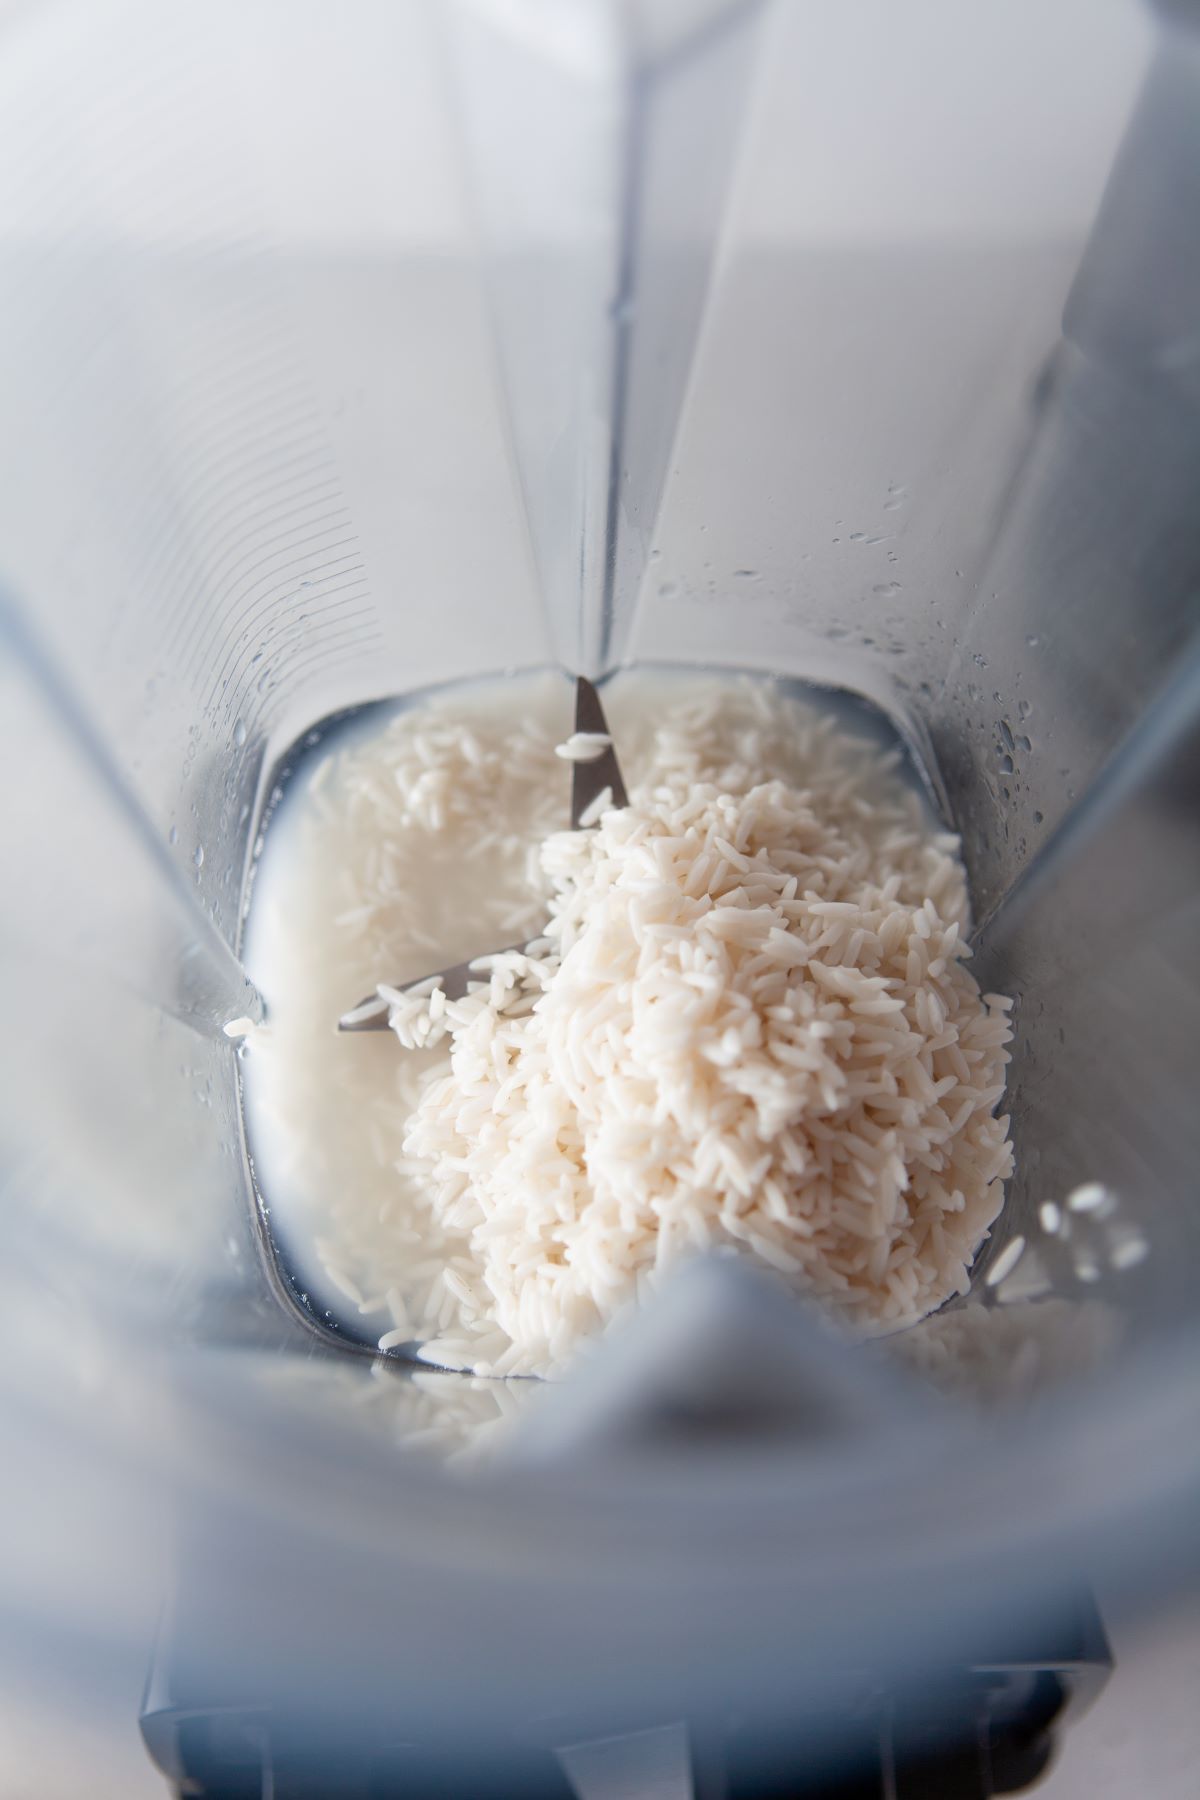 White rice after it has been soaked overnight.